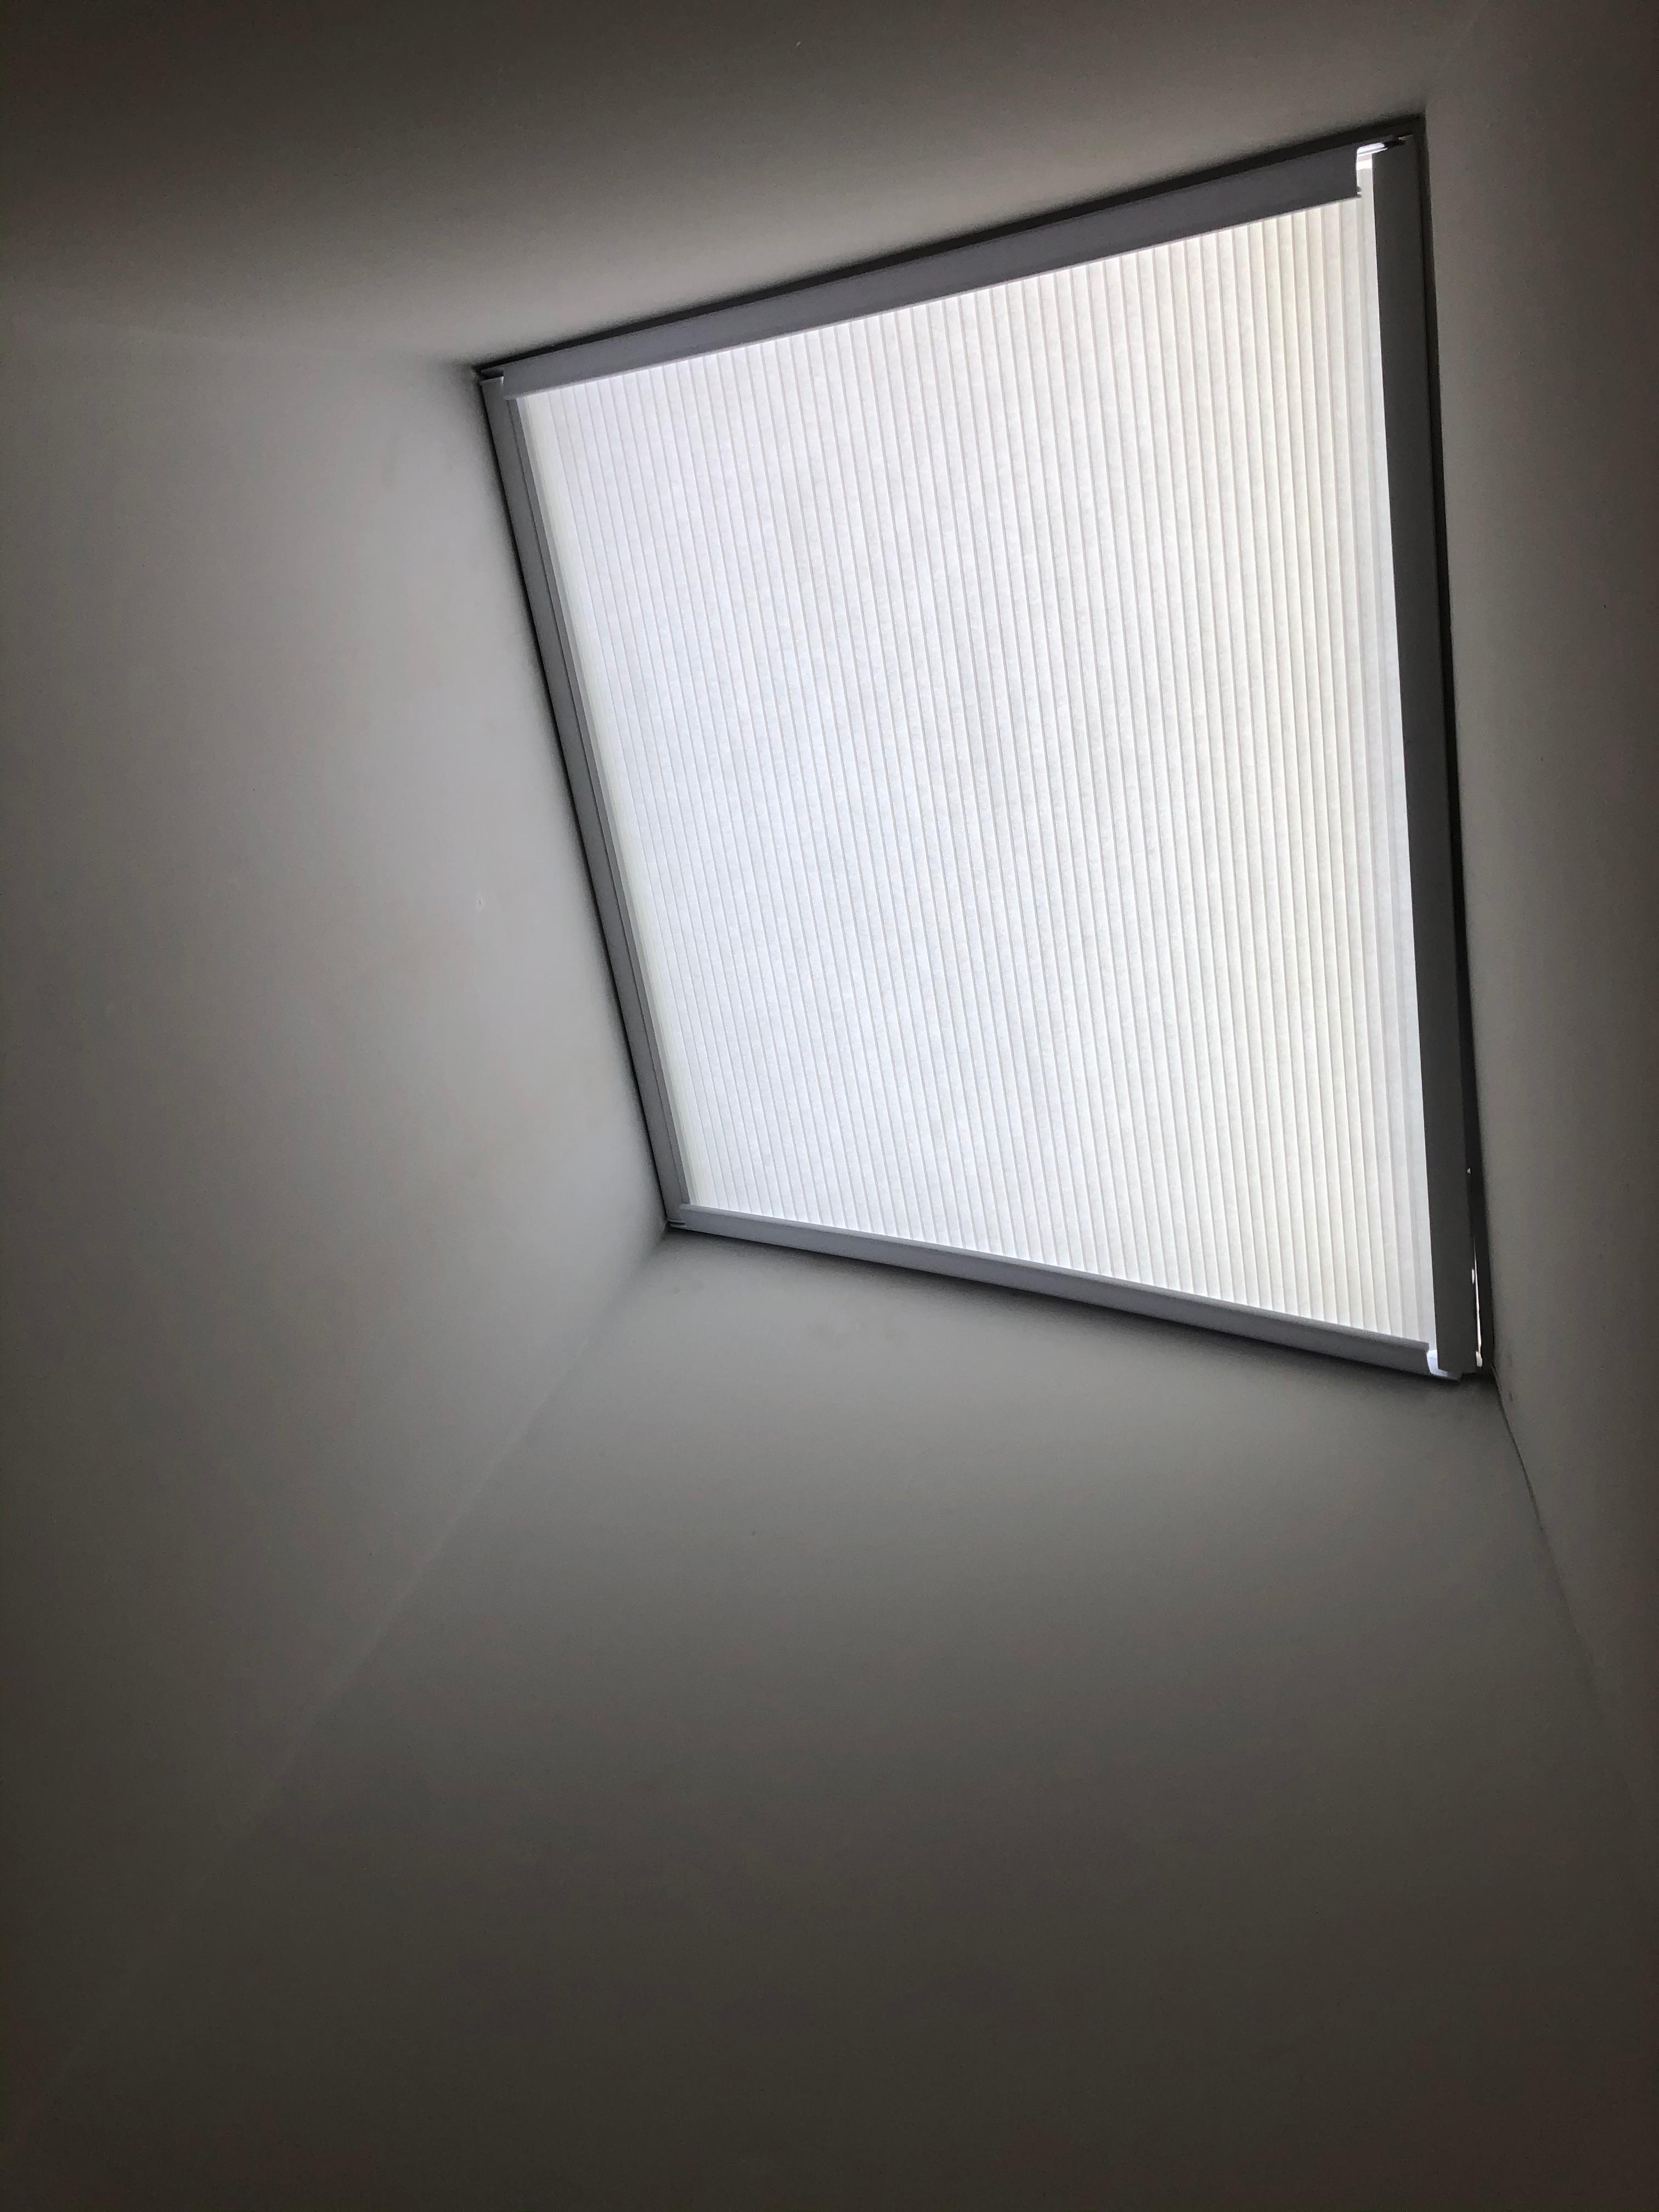 Automation for Skylights (Cellular Shade) - Florence, AL